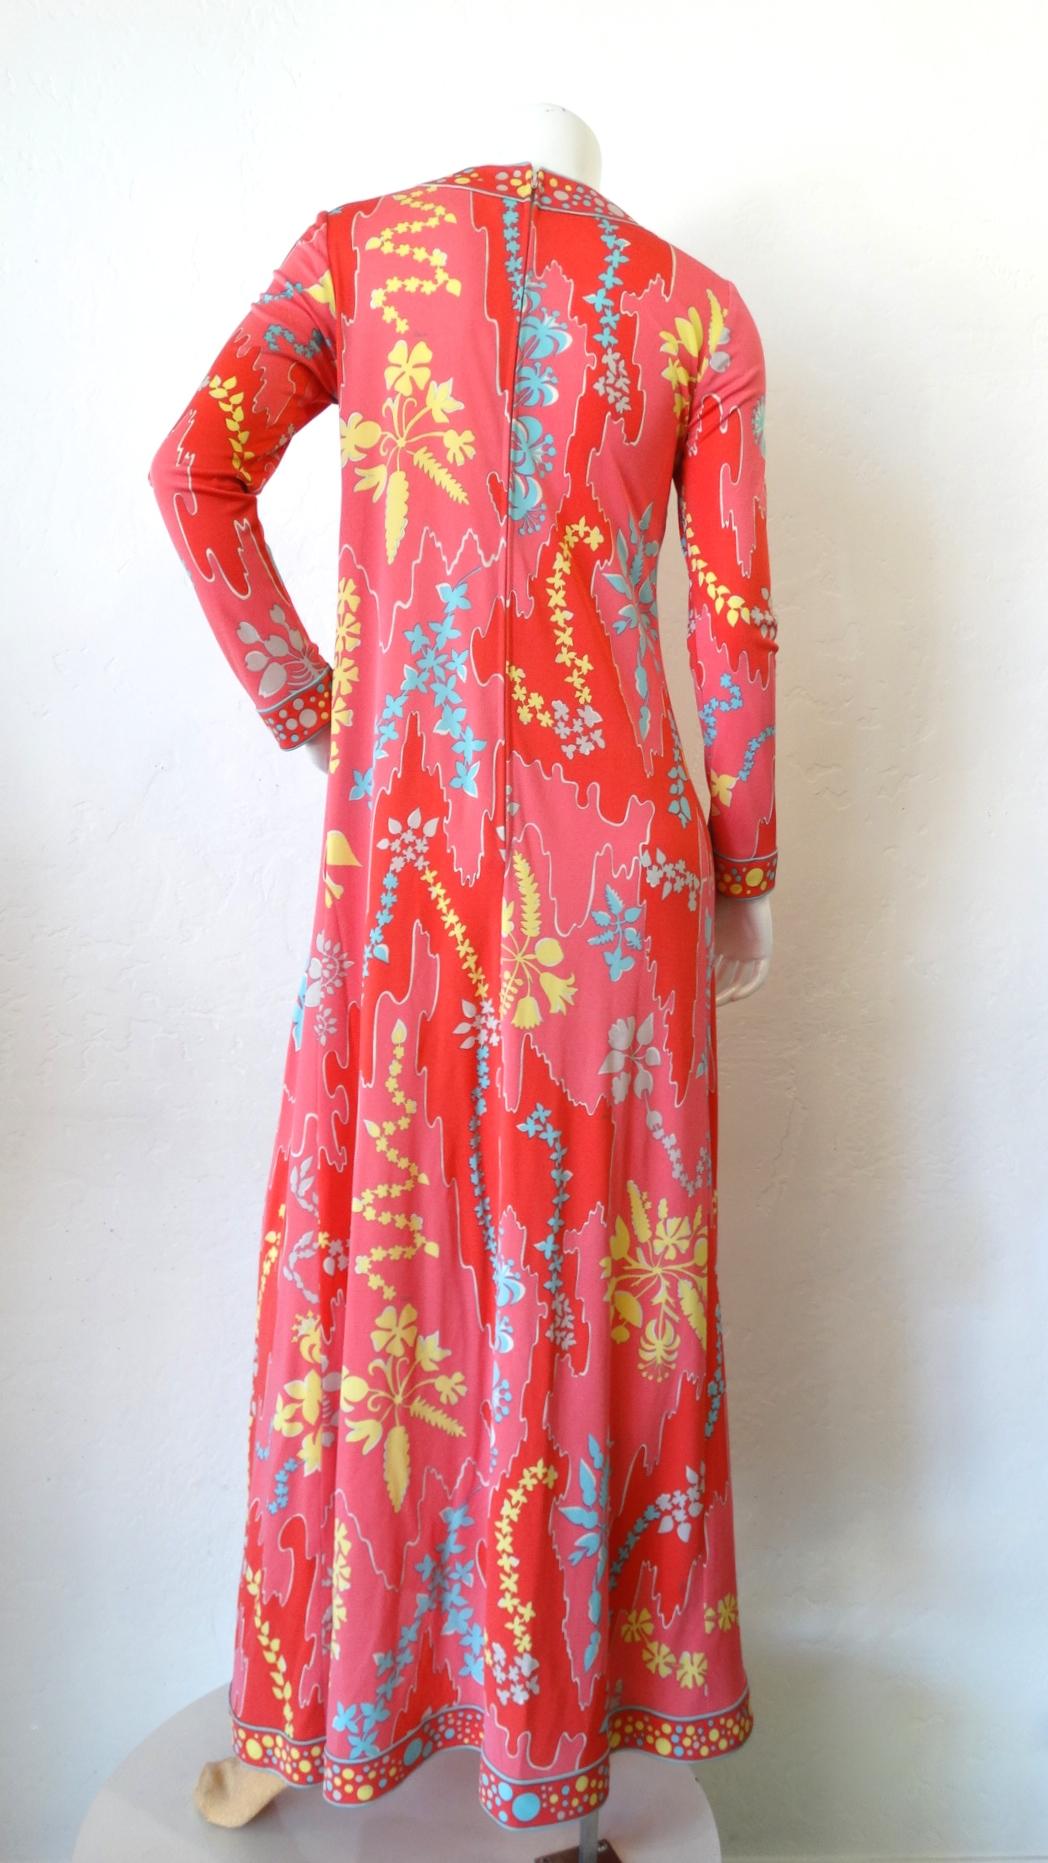 Always Be Ready To Go Out With This Amazing Dress! Circa 1970s, this Averardo Bessi maxi dress features a vibrant motif made up of floral and abstract designs. The high circular neck, cuffs and hem include a polka dot pattern. Zipper in the back.